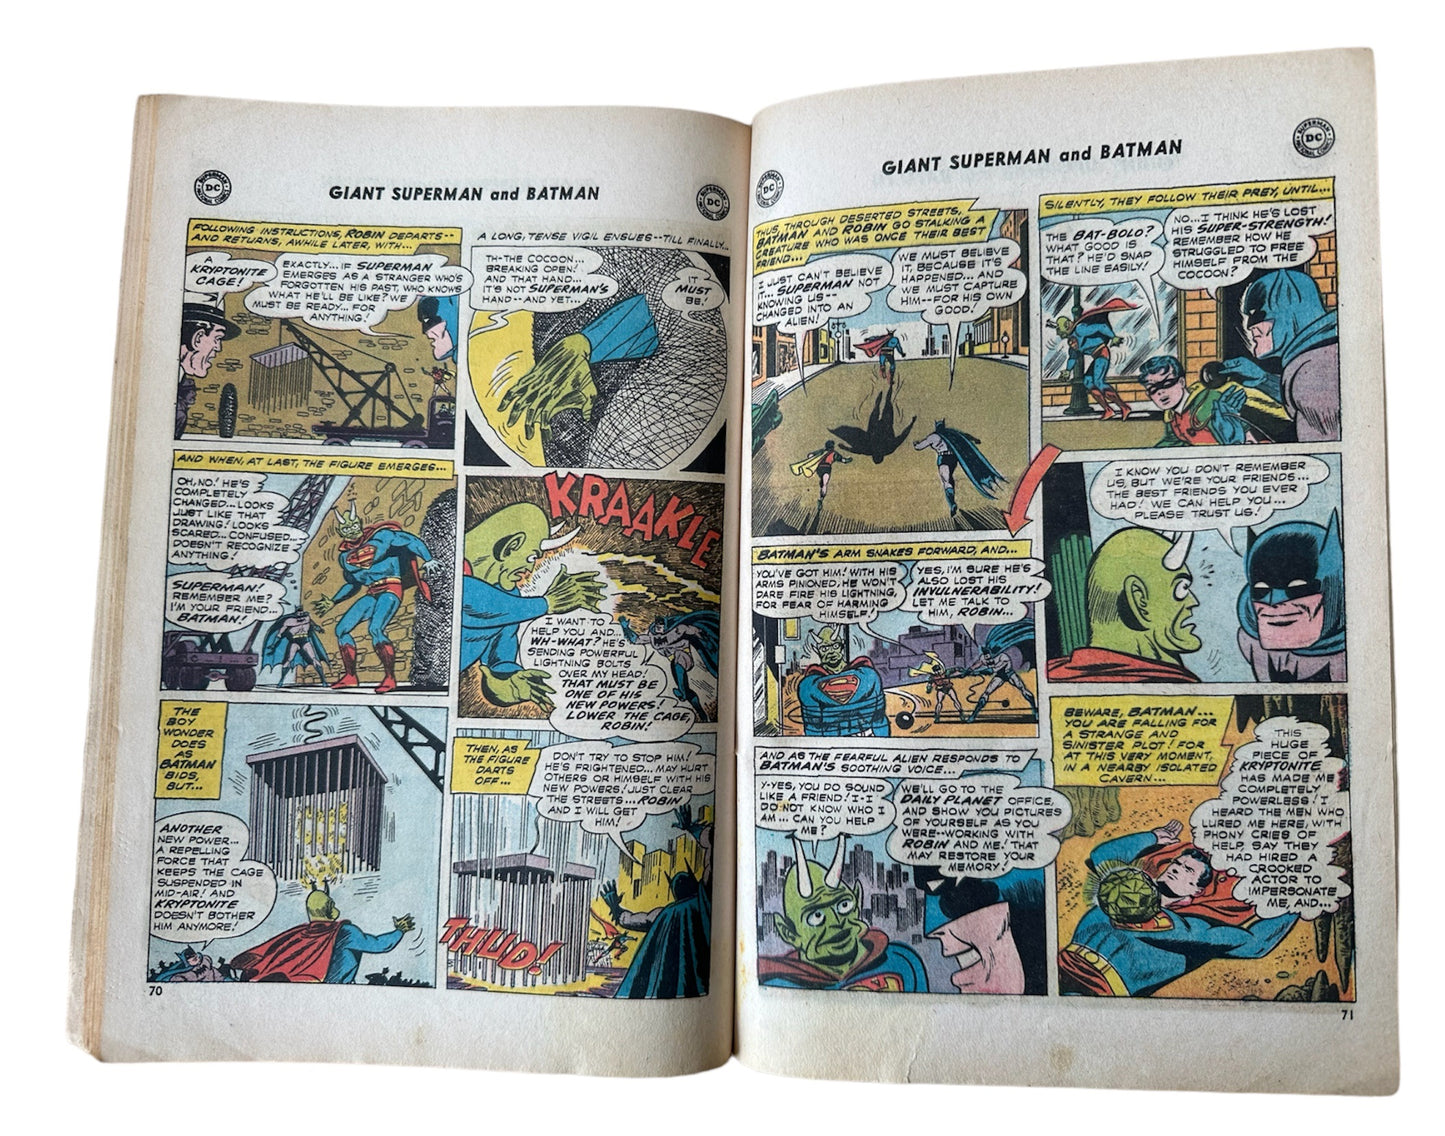 Vintage 1966 DC Worlds Finest Comics 80 Page Giant Issue Number 161 Starring Superman And Batman With Robin  - Good Condition Vintage Comic